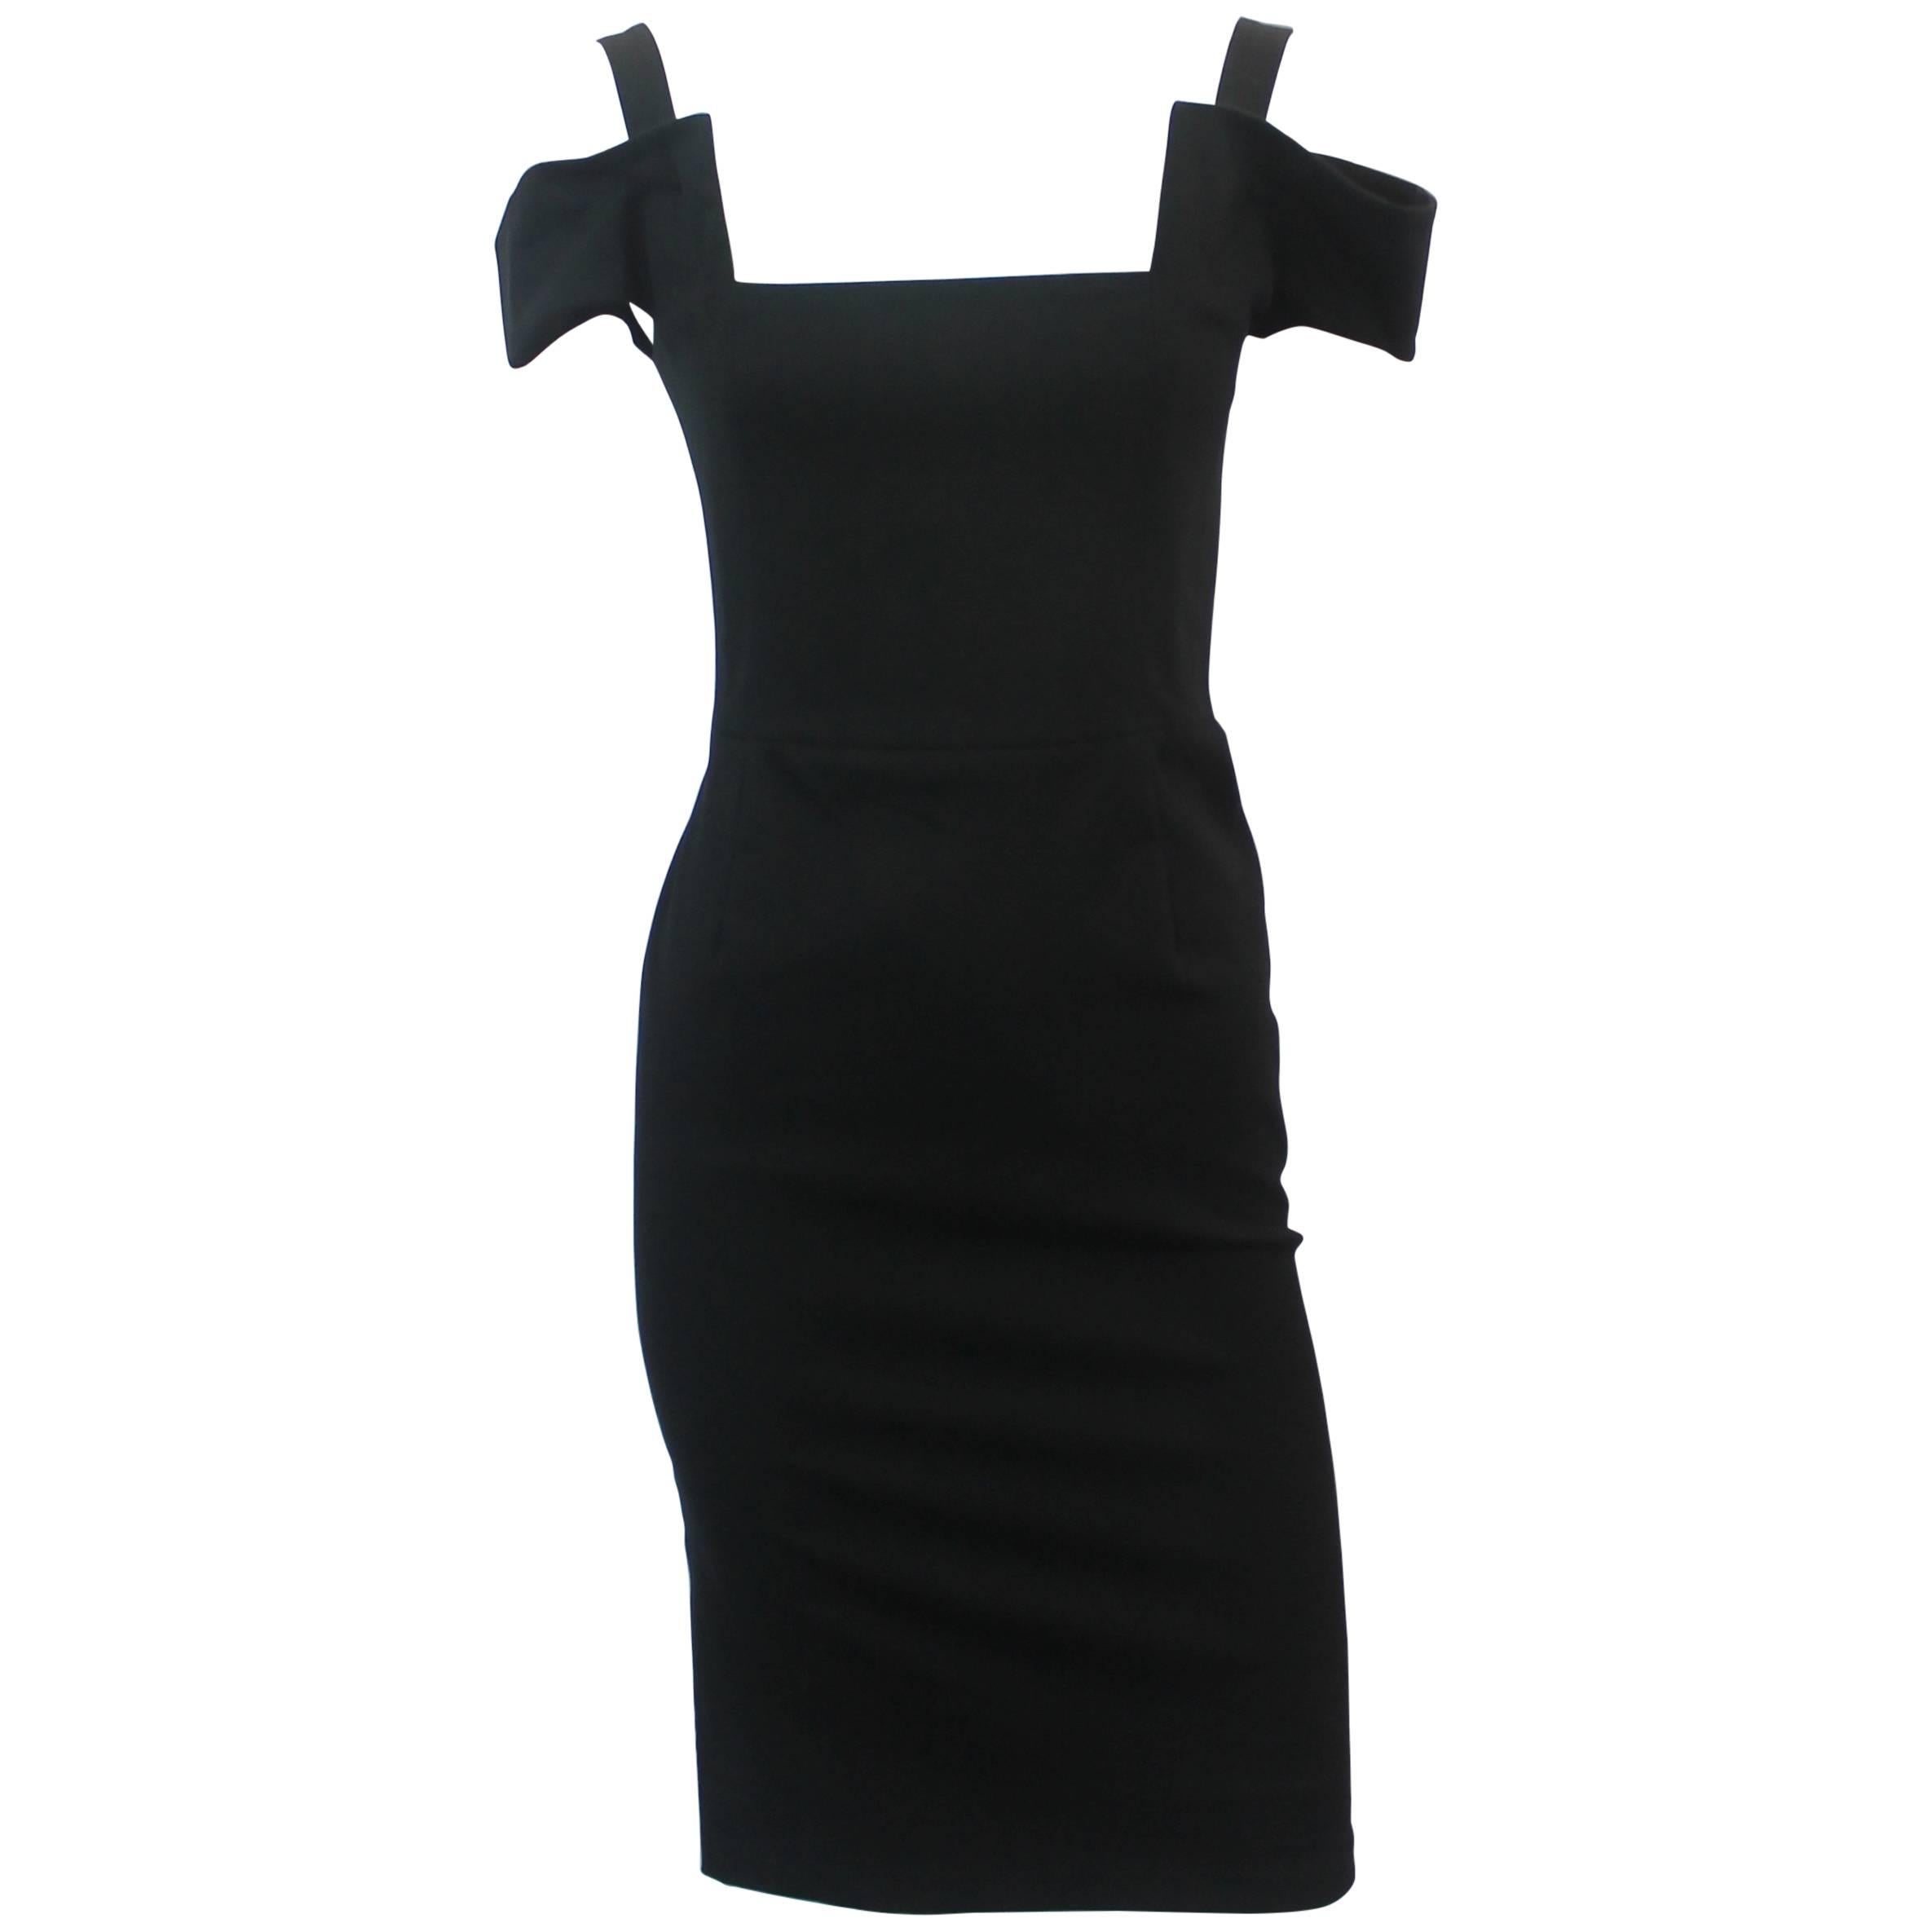 Fendi Black Cotton Blend Tapered Dress with Cutouts - 40